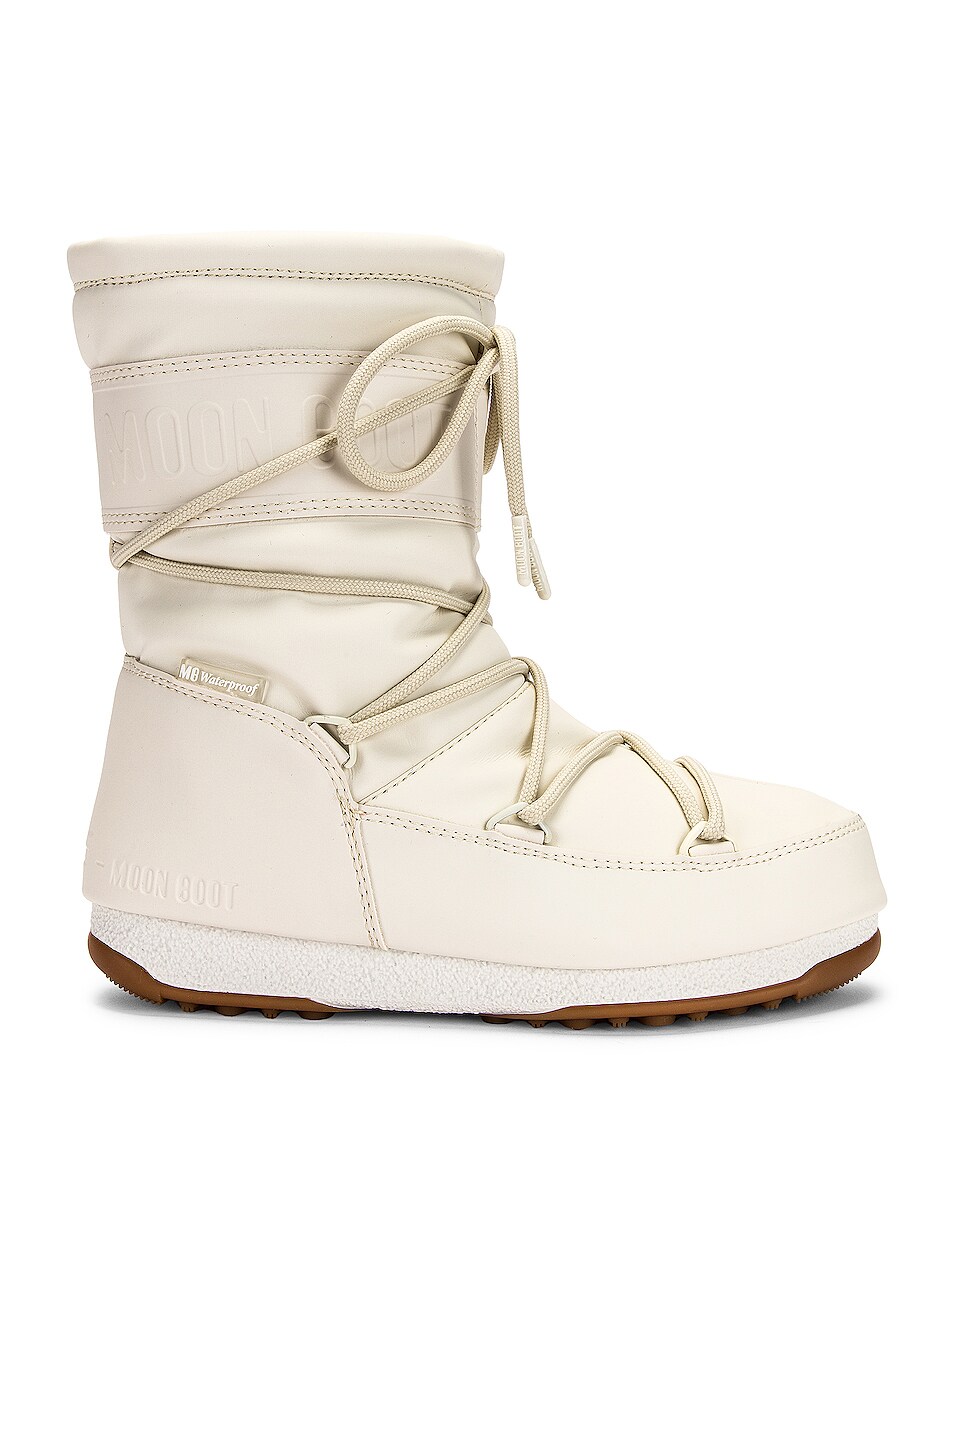 Image 1 of MOON BOOT Mid Rubber Boot in Cream